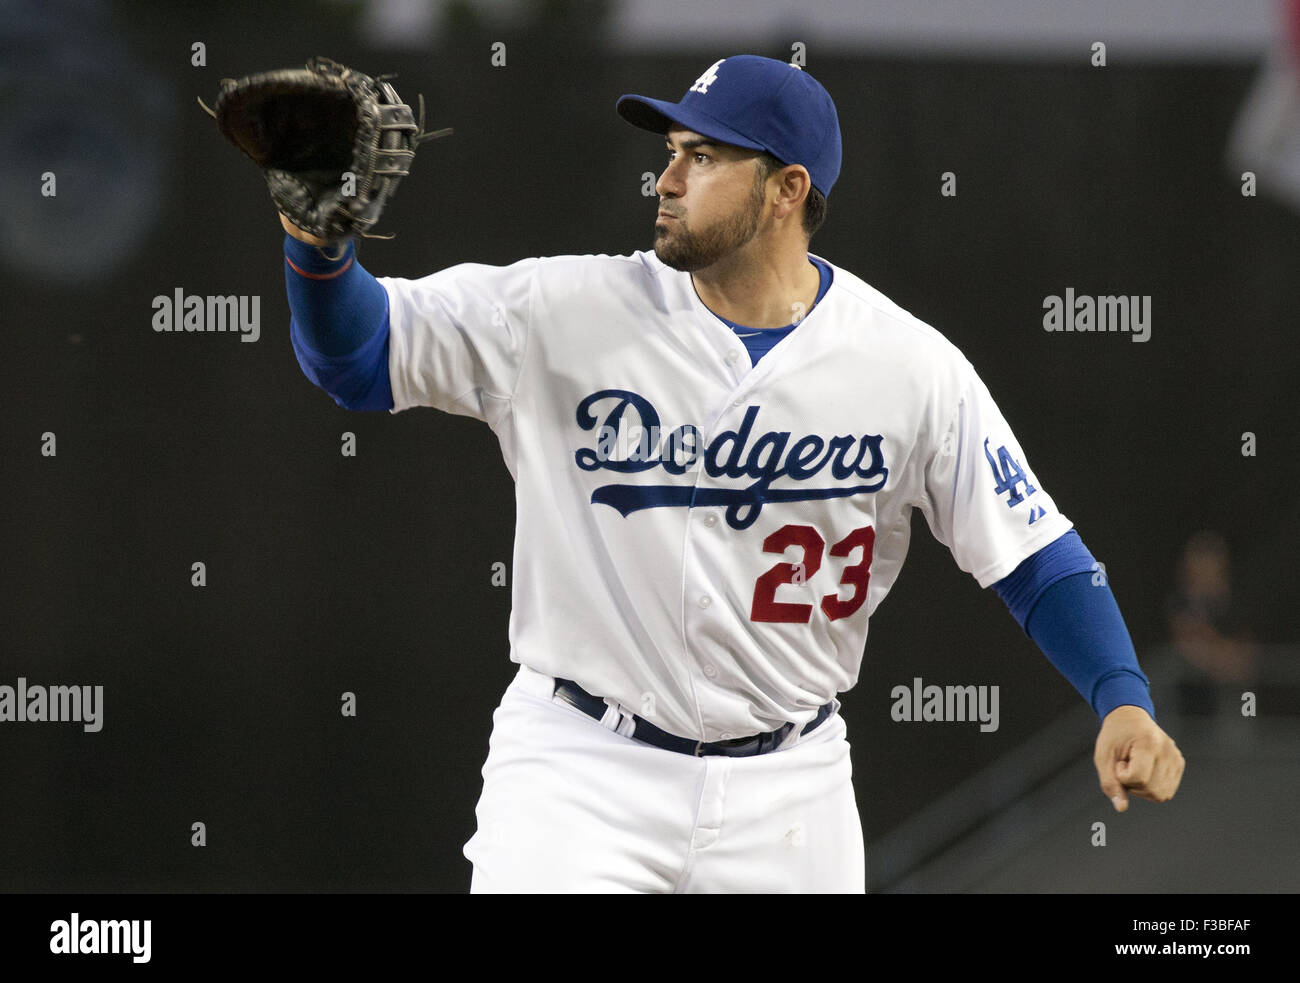 Los Angeles, CALIFORNIA, UNITED STATES OF AMERICA, USA. 3rd Oct, 2015. Los Angeles Dodgers 23 Adrian Gonzalez during the first inning against the San Diego Padres at Dodger Stadium on October 3, 2015 in Los Angeles, California.ARMANDO ARORIZO © Armando Arorizo/Prensa Internacional/ZUMA Wire/Alamy Live News Stock Photo